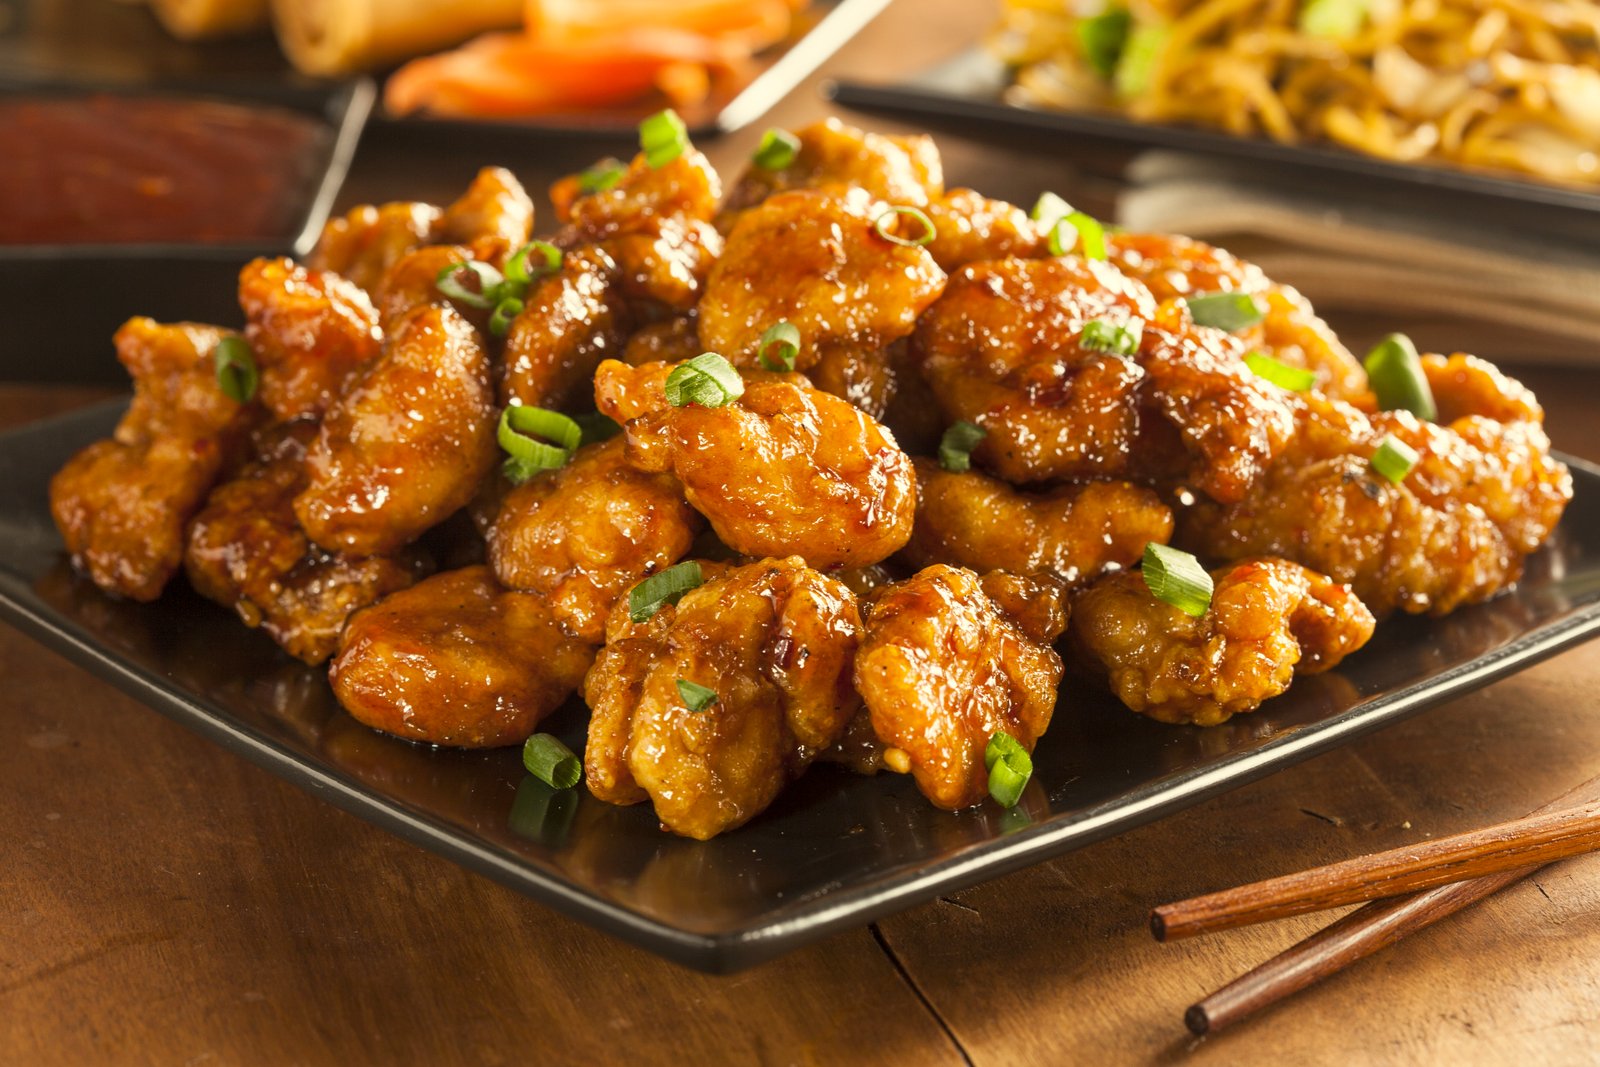 🥢 We Know Your Lucky Number Based on Your Chinese Food Order Chinese orange chicken